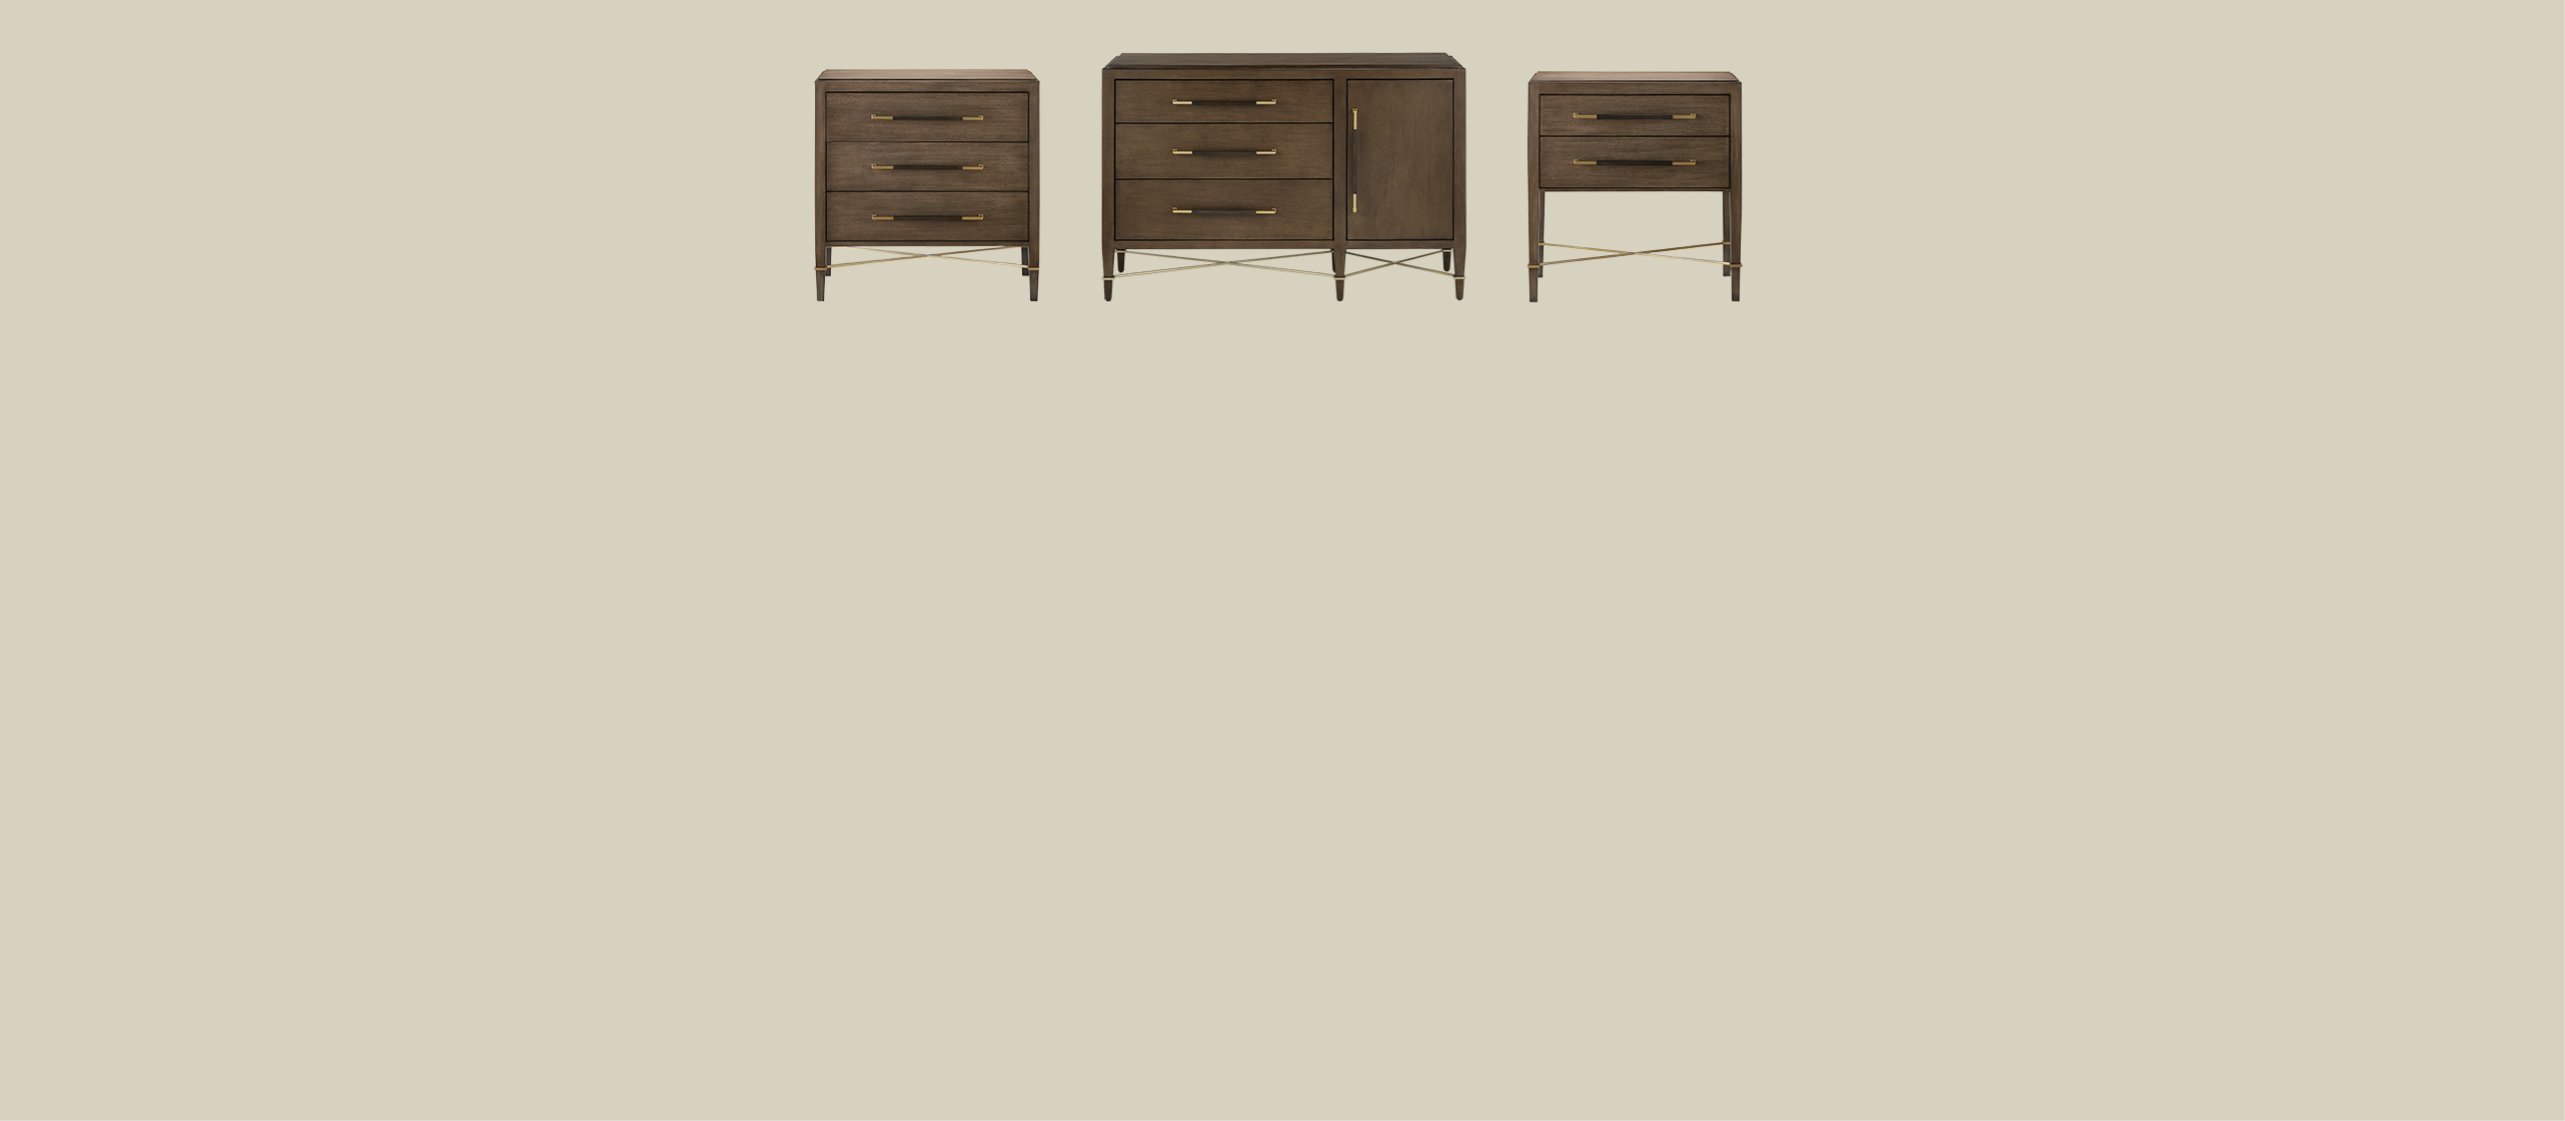 Furniture Collection.jpg